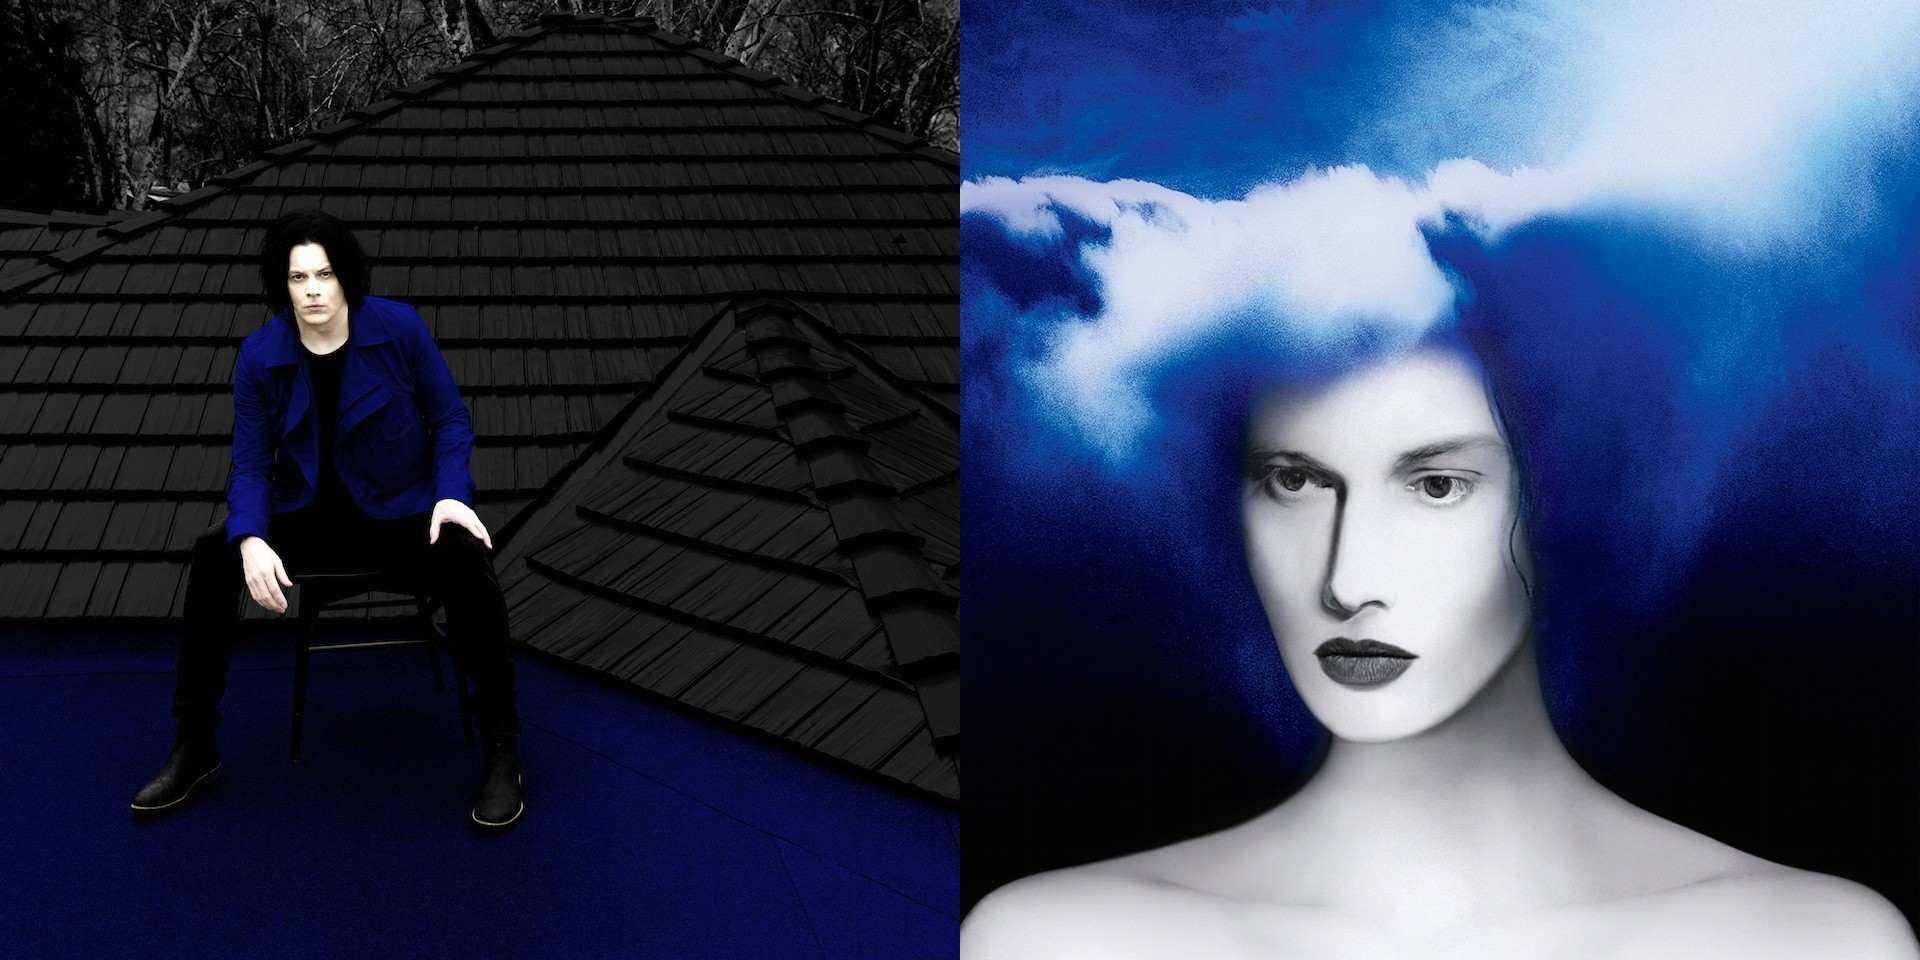 Mosta Records LP to host Jack White album launch this weekend, offer discount on all Third Man Records items